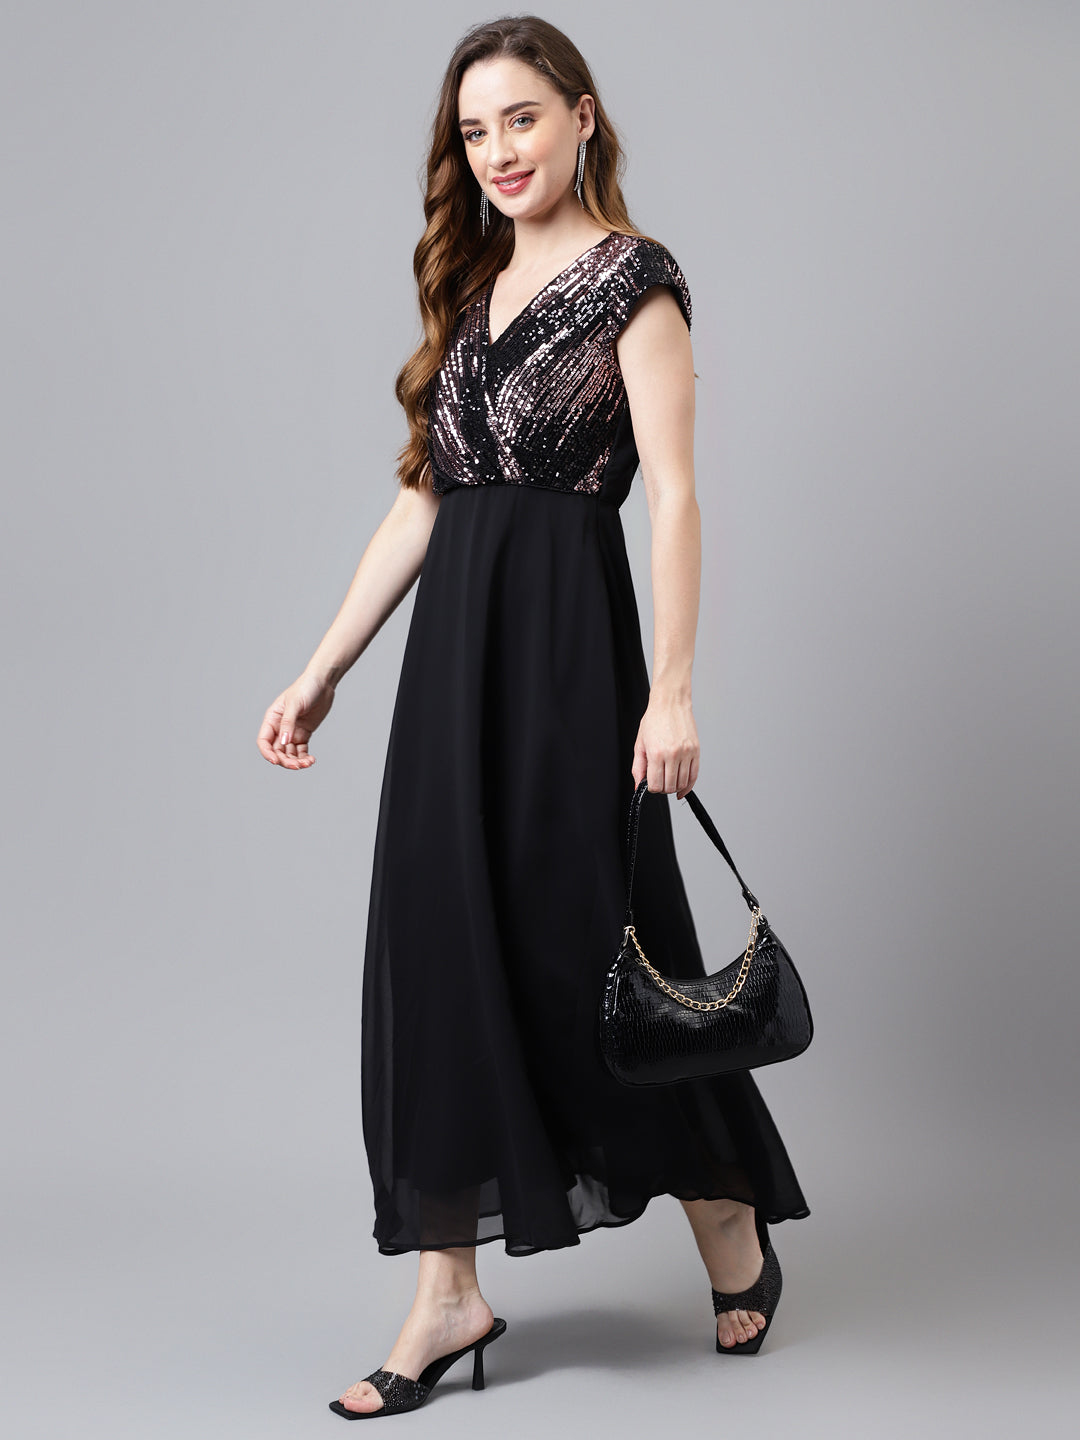 Black Cap Sleeve V-Neck Solid Women Maxi Dress for Casual